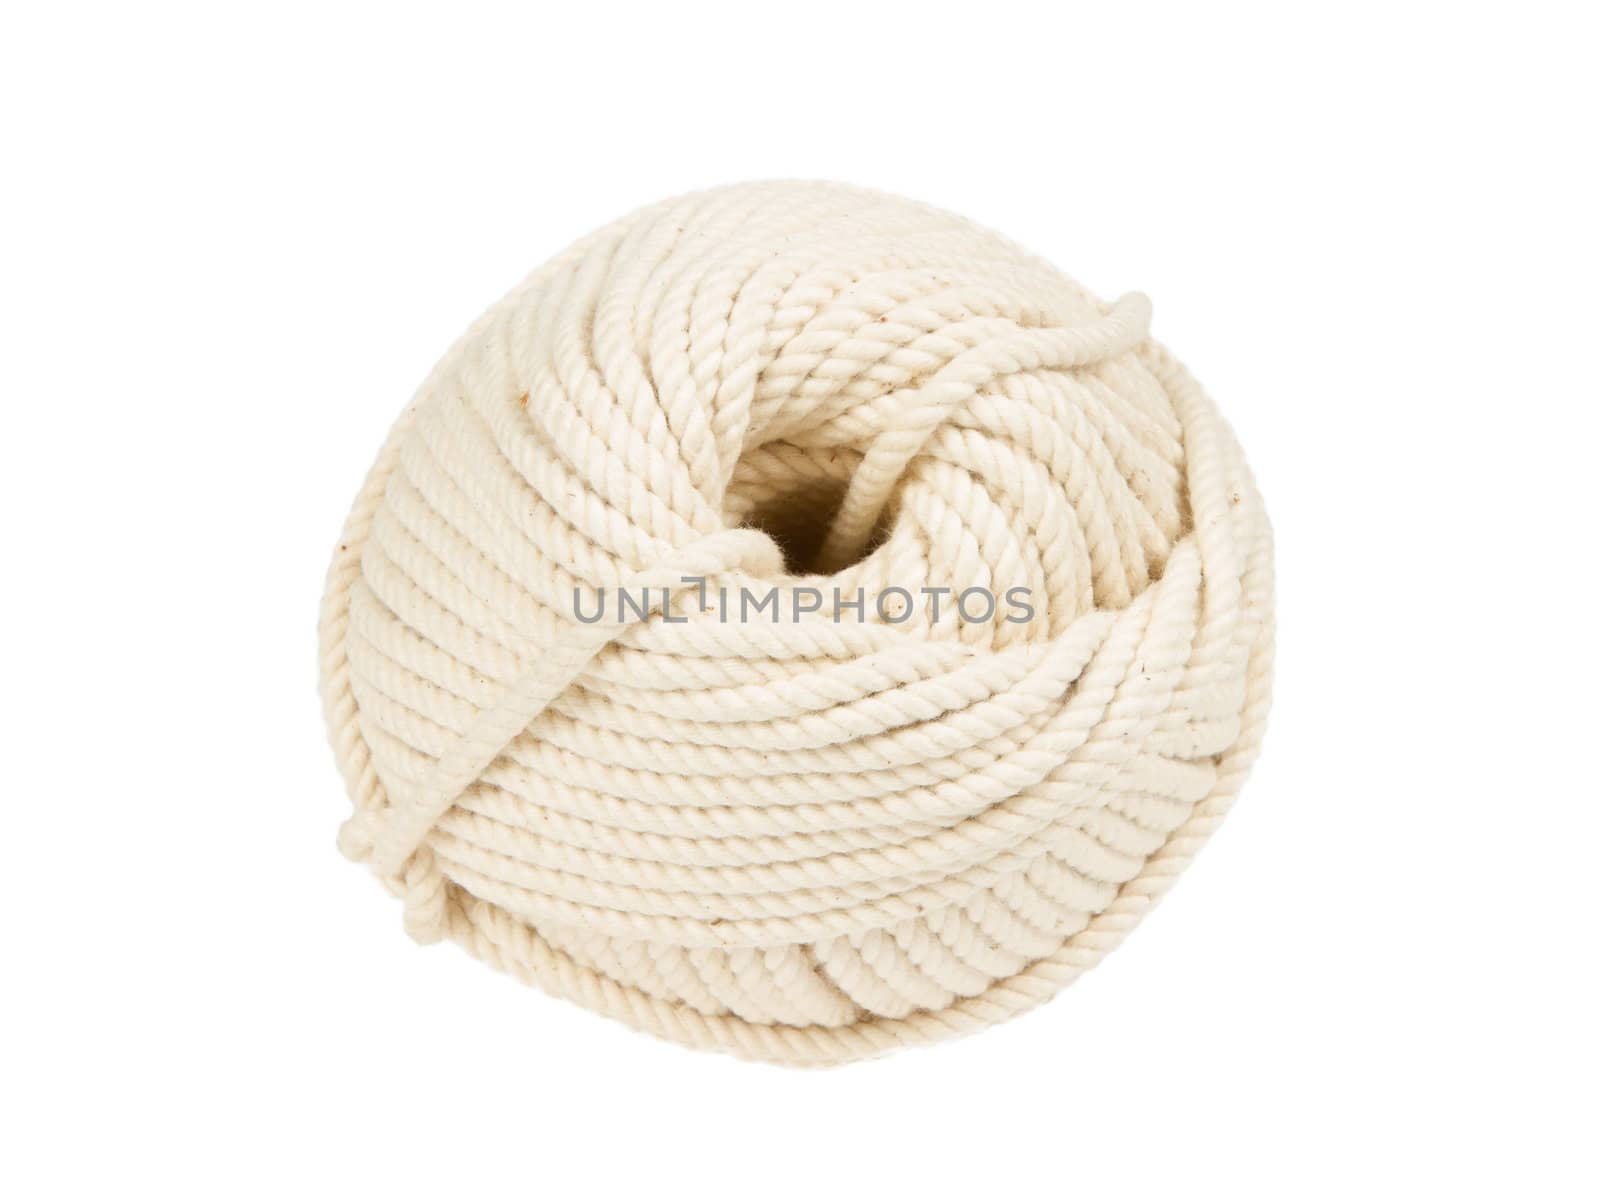 Knitting yarn isolated on a white background by michaklootwijk